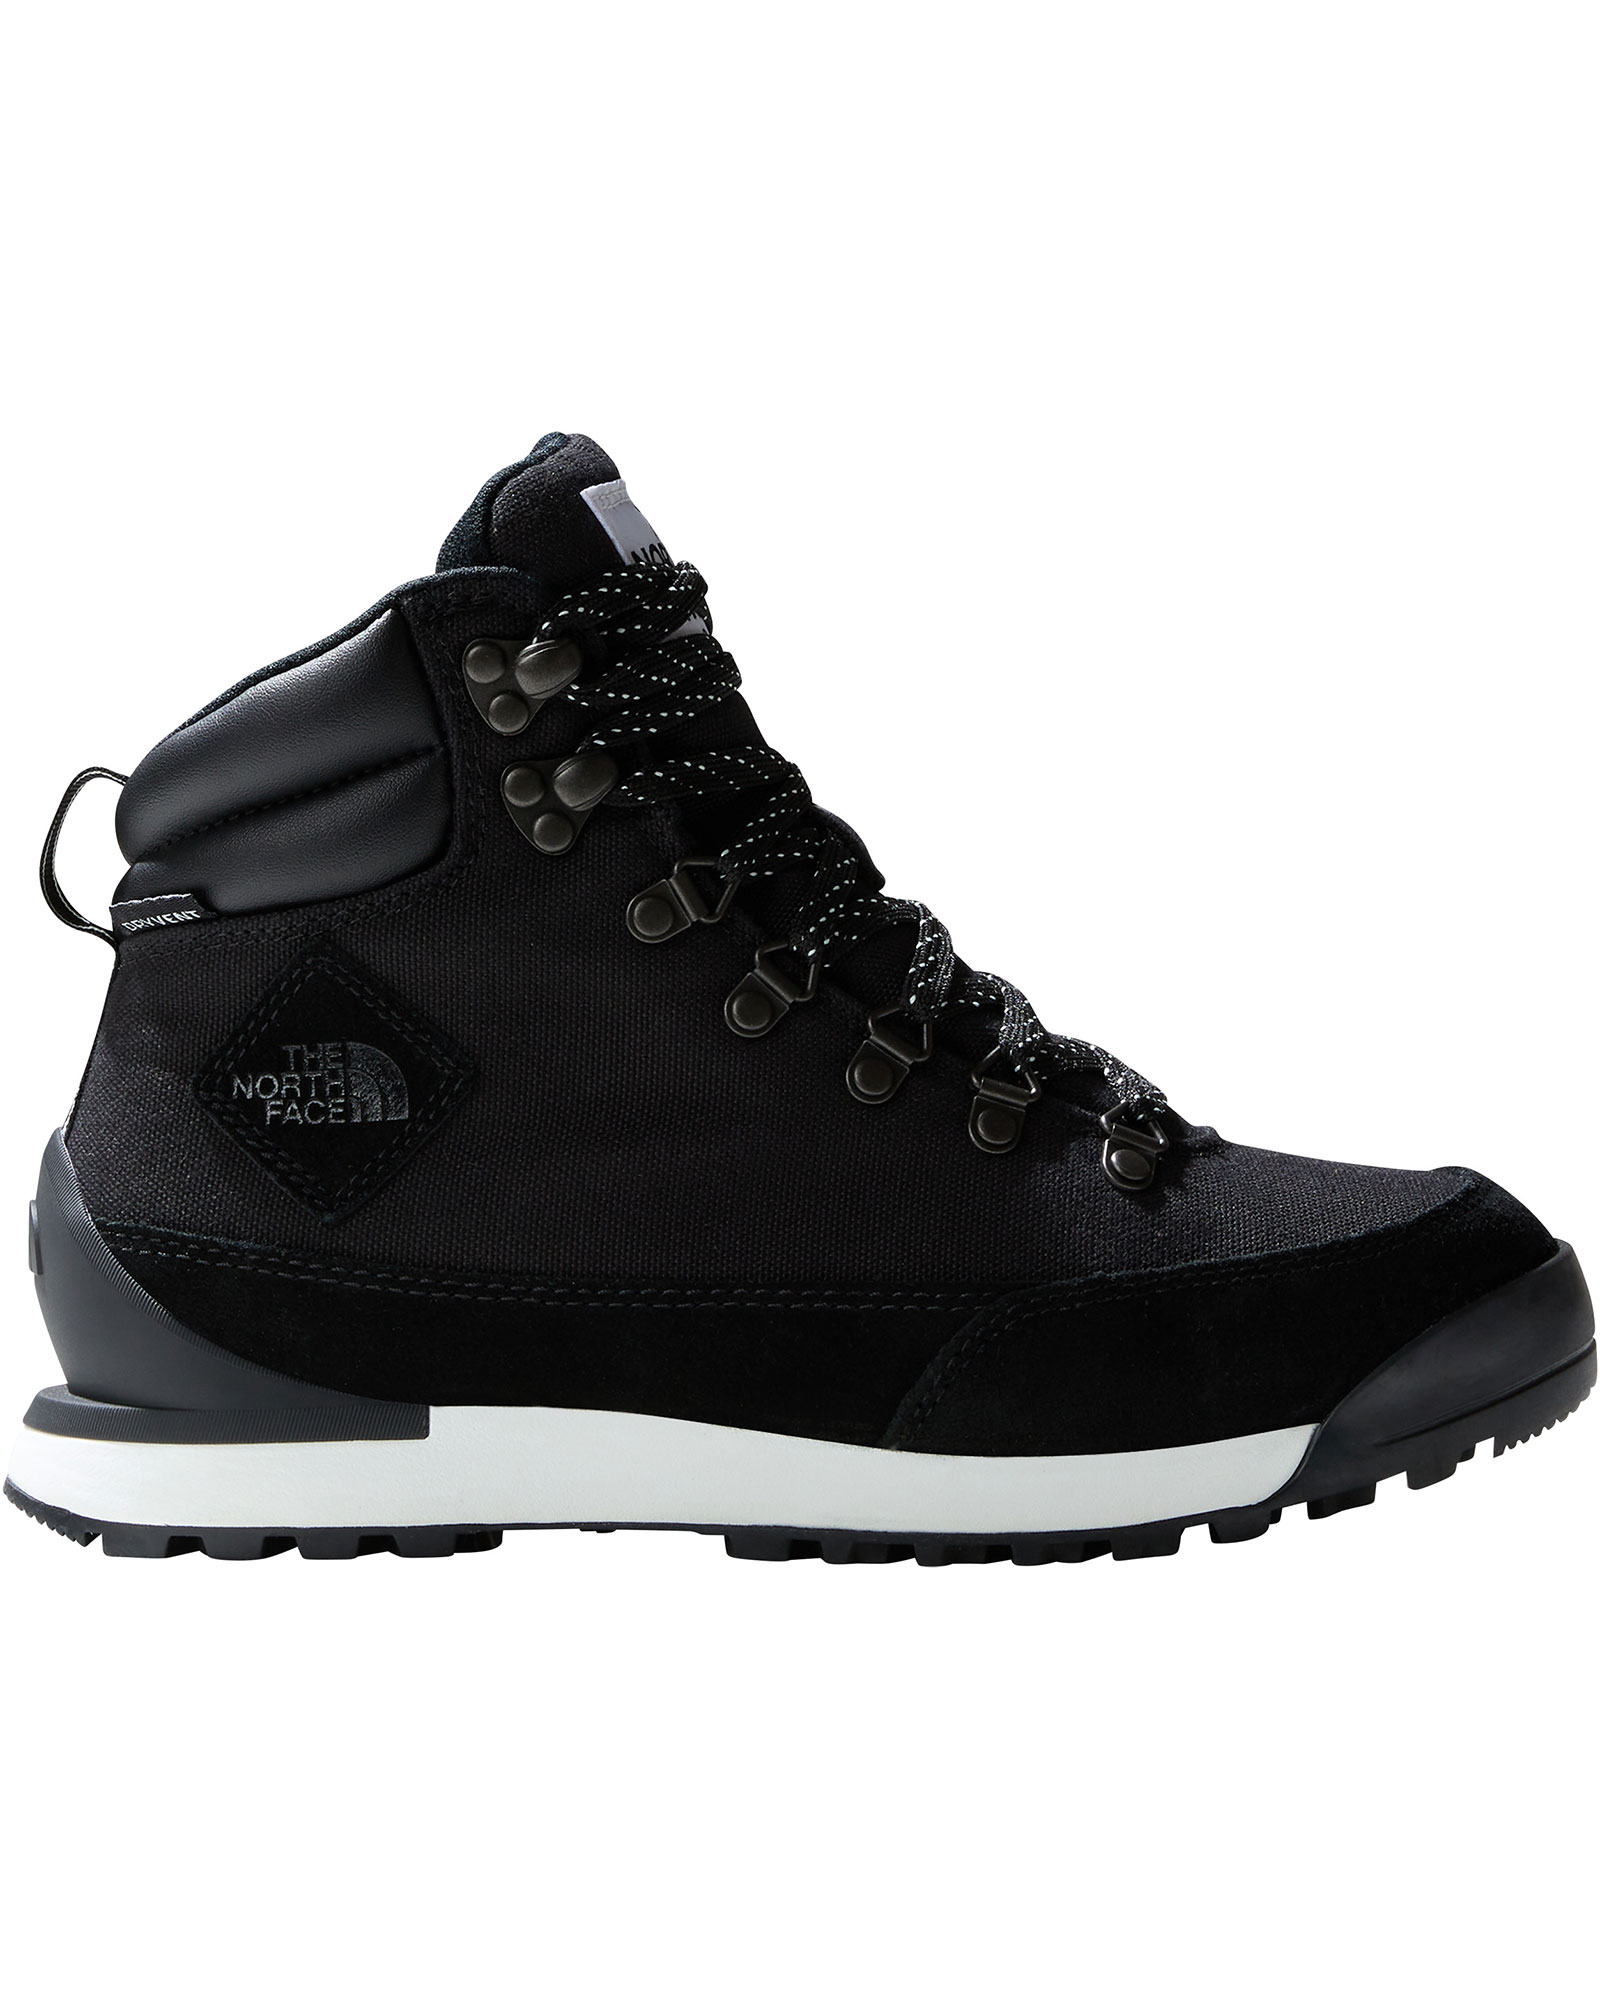 The North Face Women's Back-to-Berkeley IV Textile Waterproof Boots